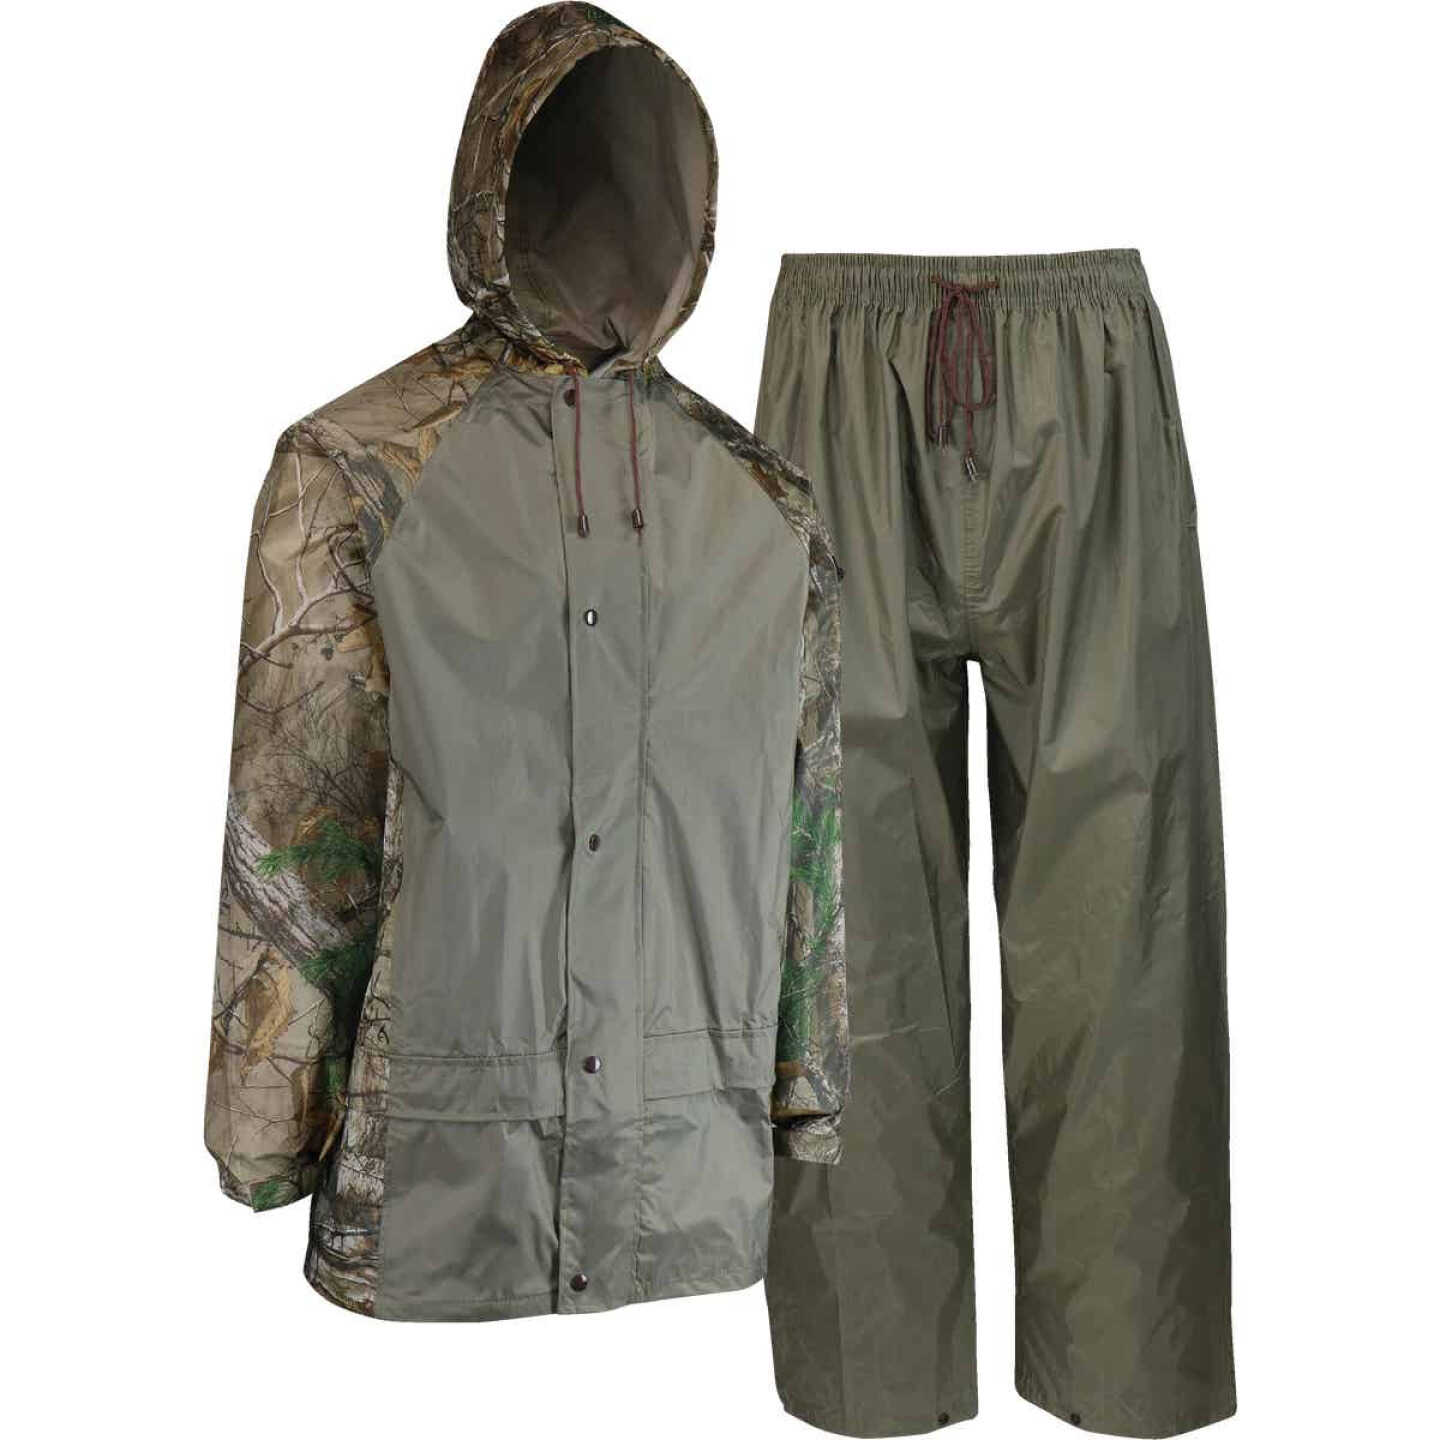 West Chester Large 2-Piece RealTree Camo Polyester Rain Suit Image 1